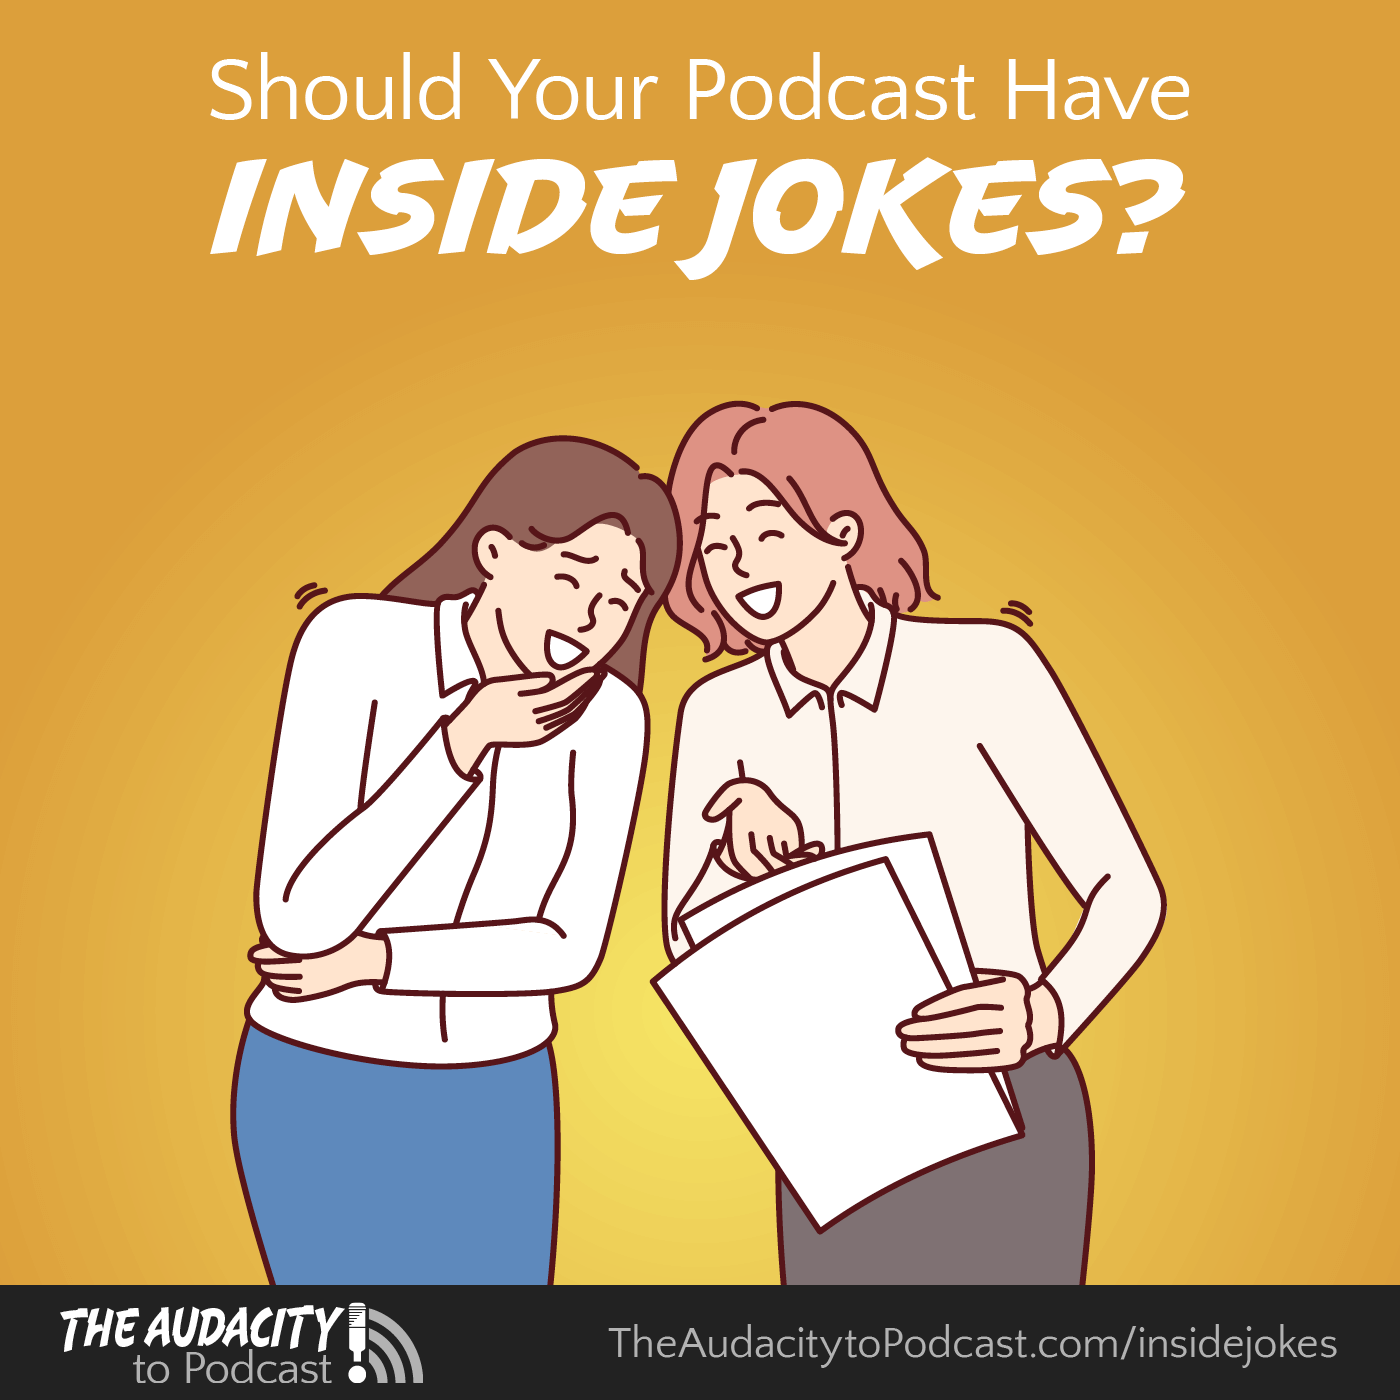 Should Your Podcast Have Inside Jokes?